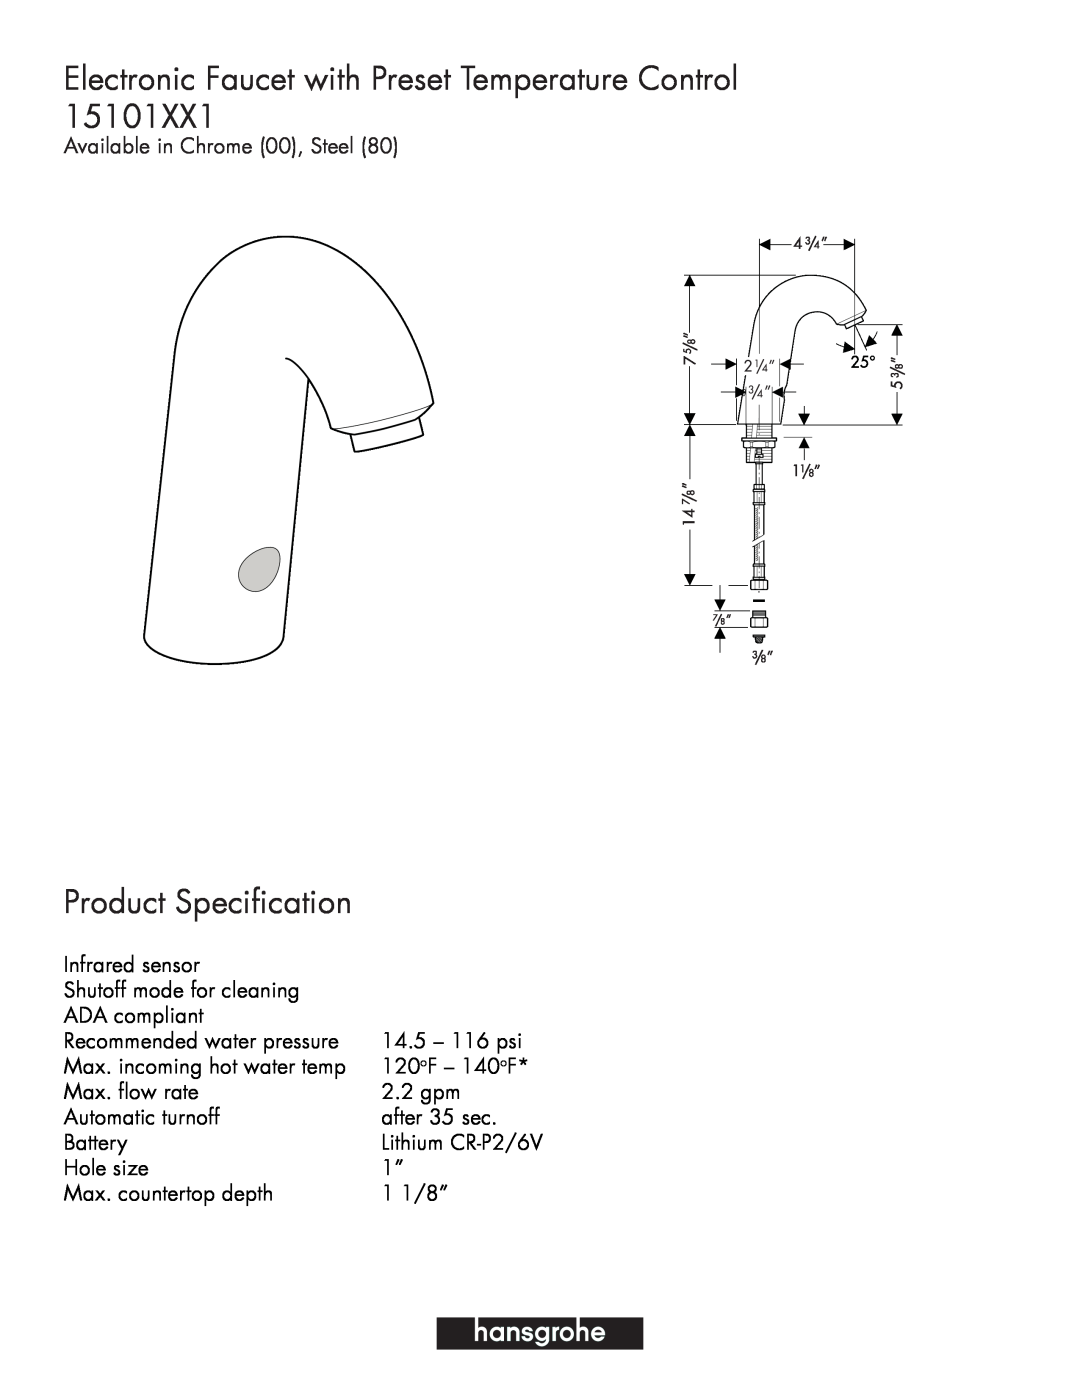 Hans Grohe 15101XX1 manual Electronic Faucet with Preset Temperature Control, Product Specification 